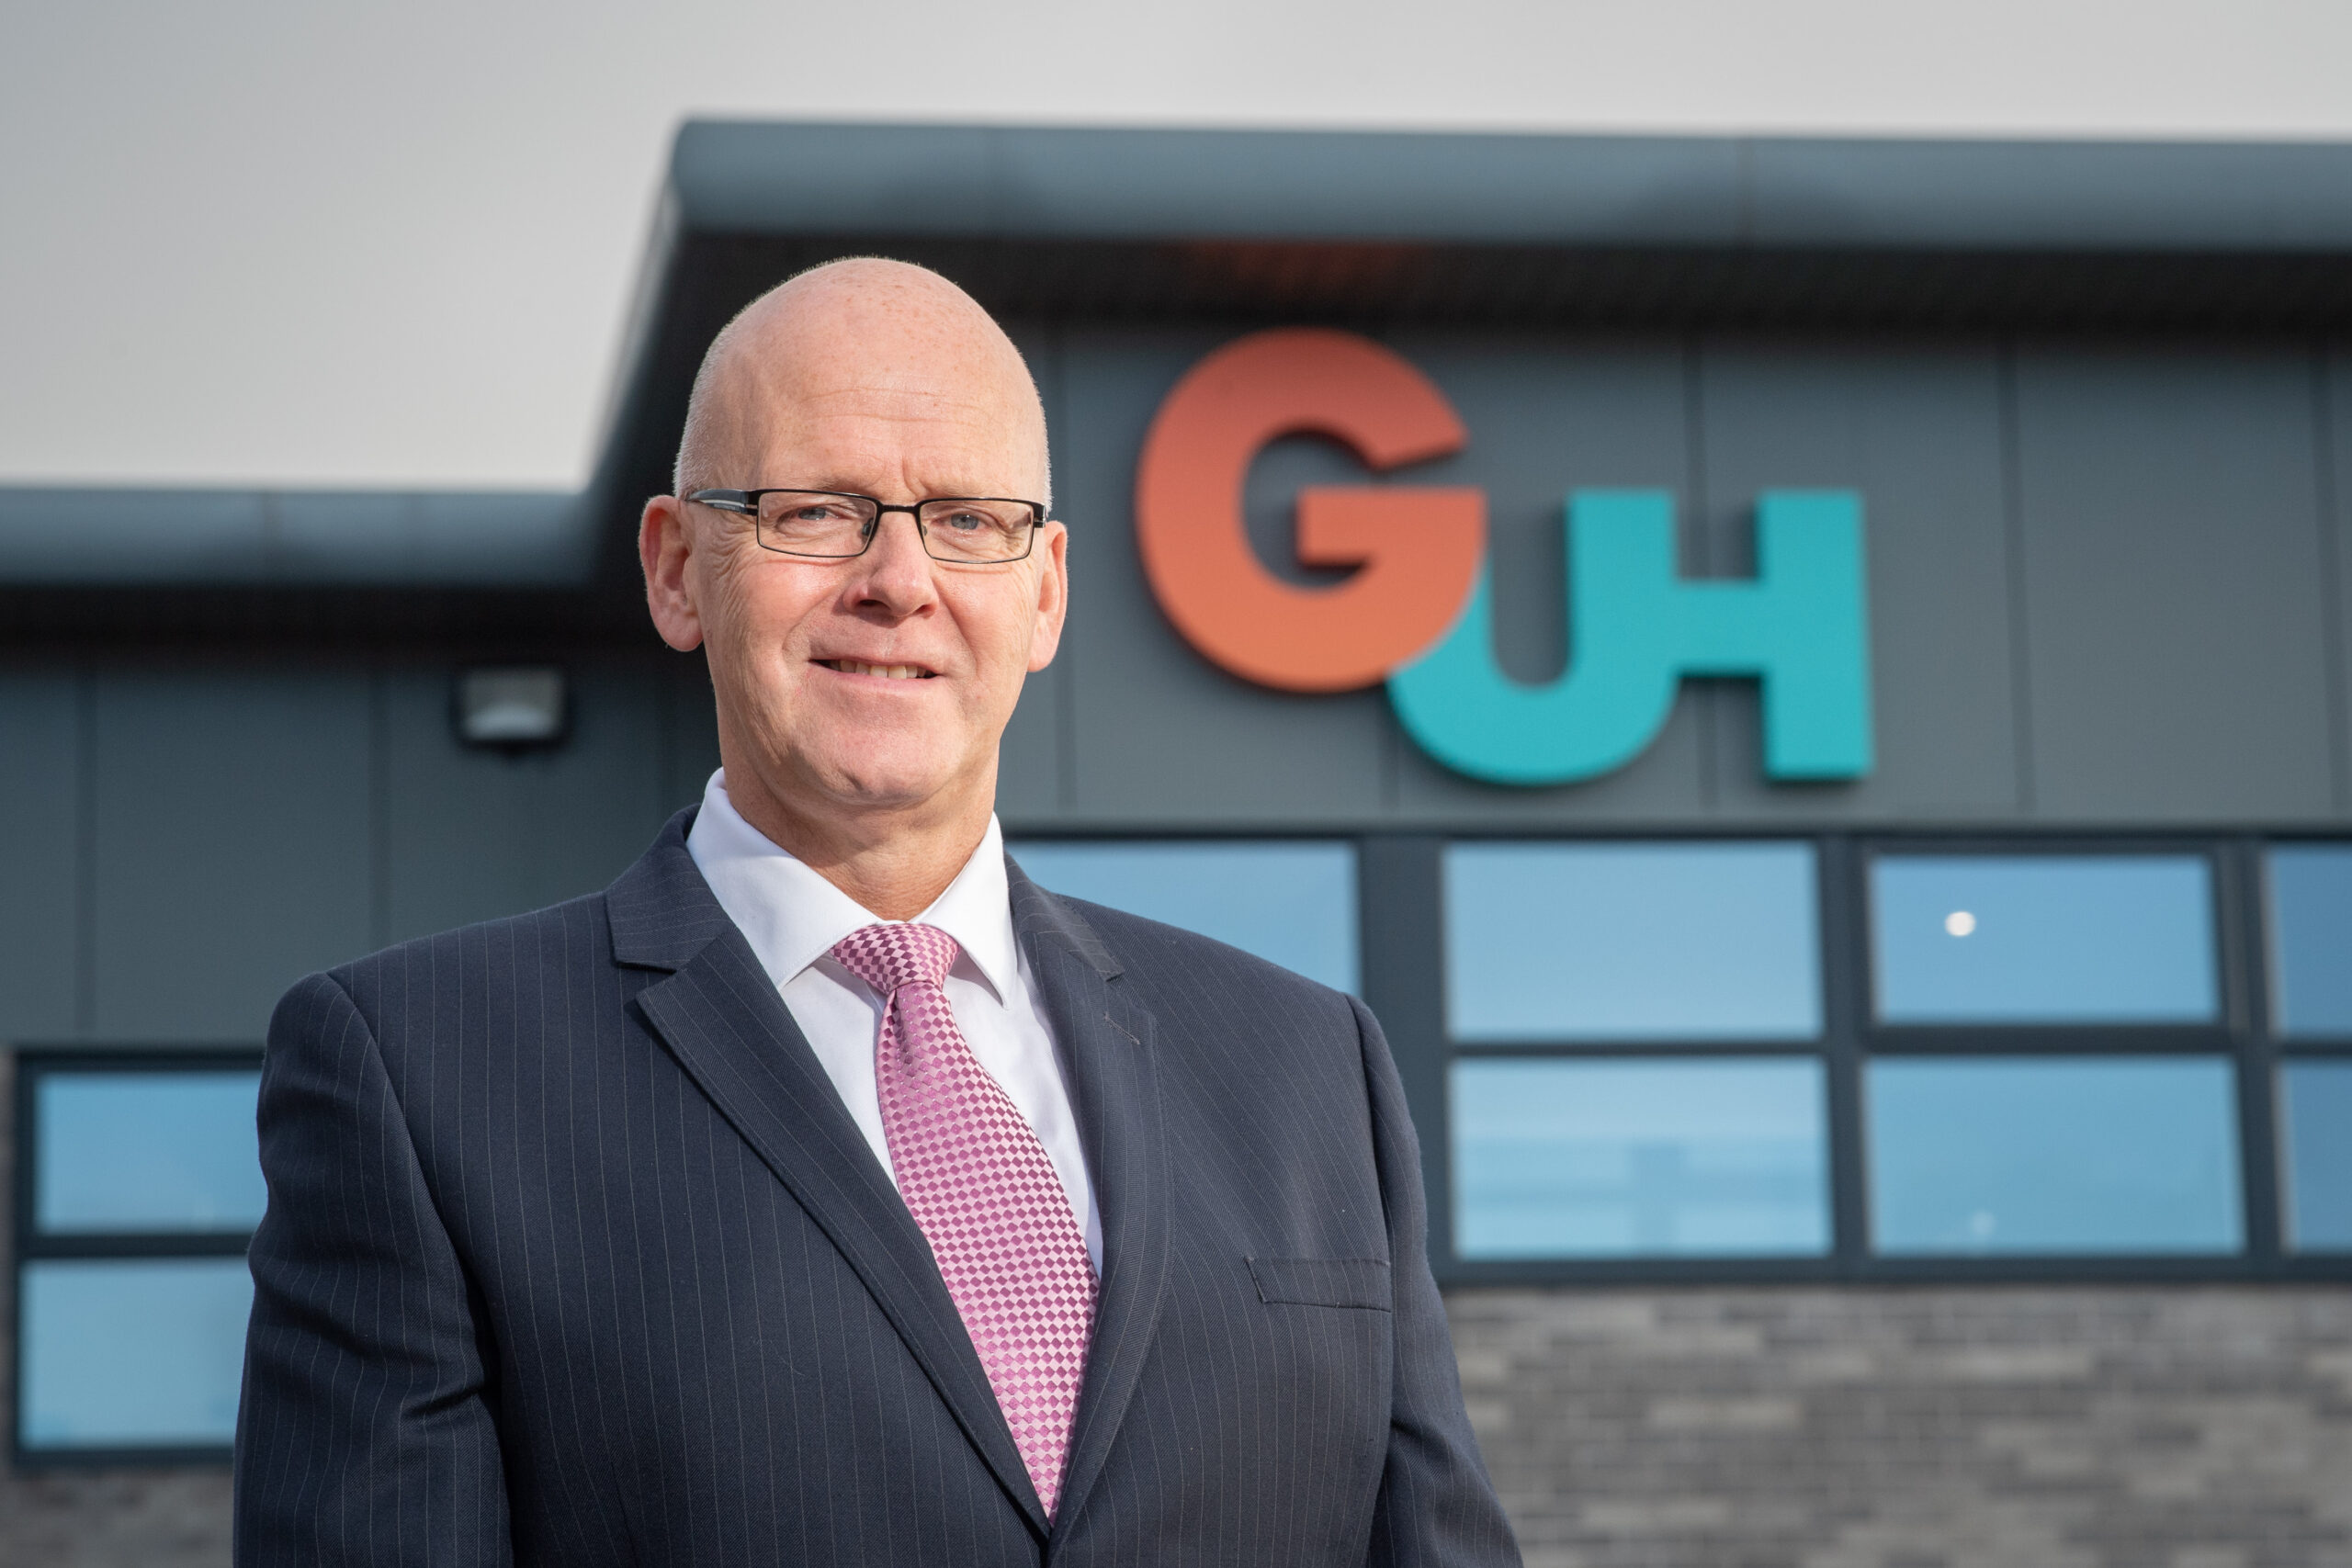 MEMBER NEWS: Global Underwater Hub aiming to establish UK as global centre of excellence for multi-billion-pound floating offshore wind mooring and anchoring systems